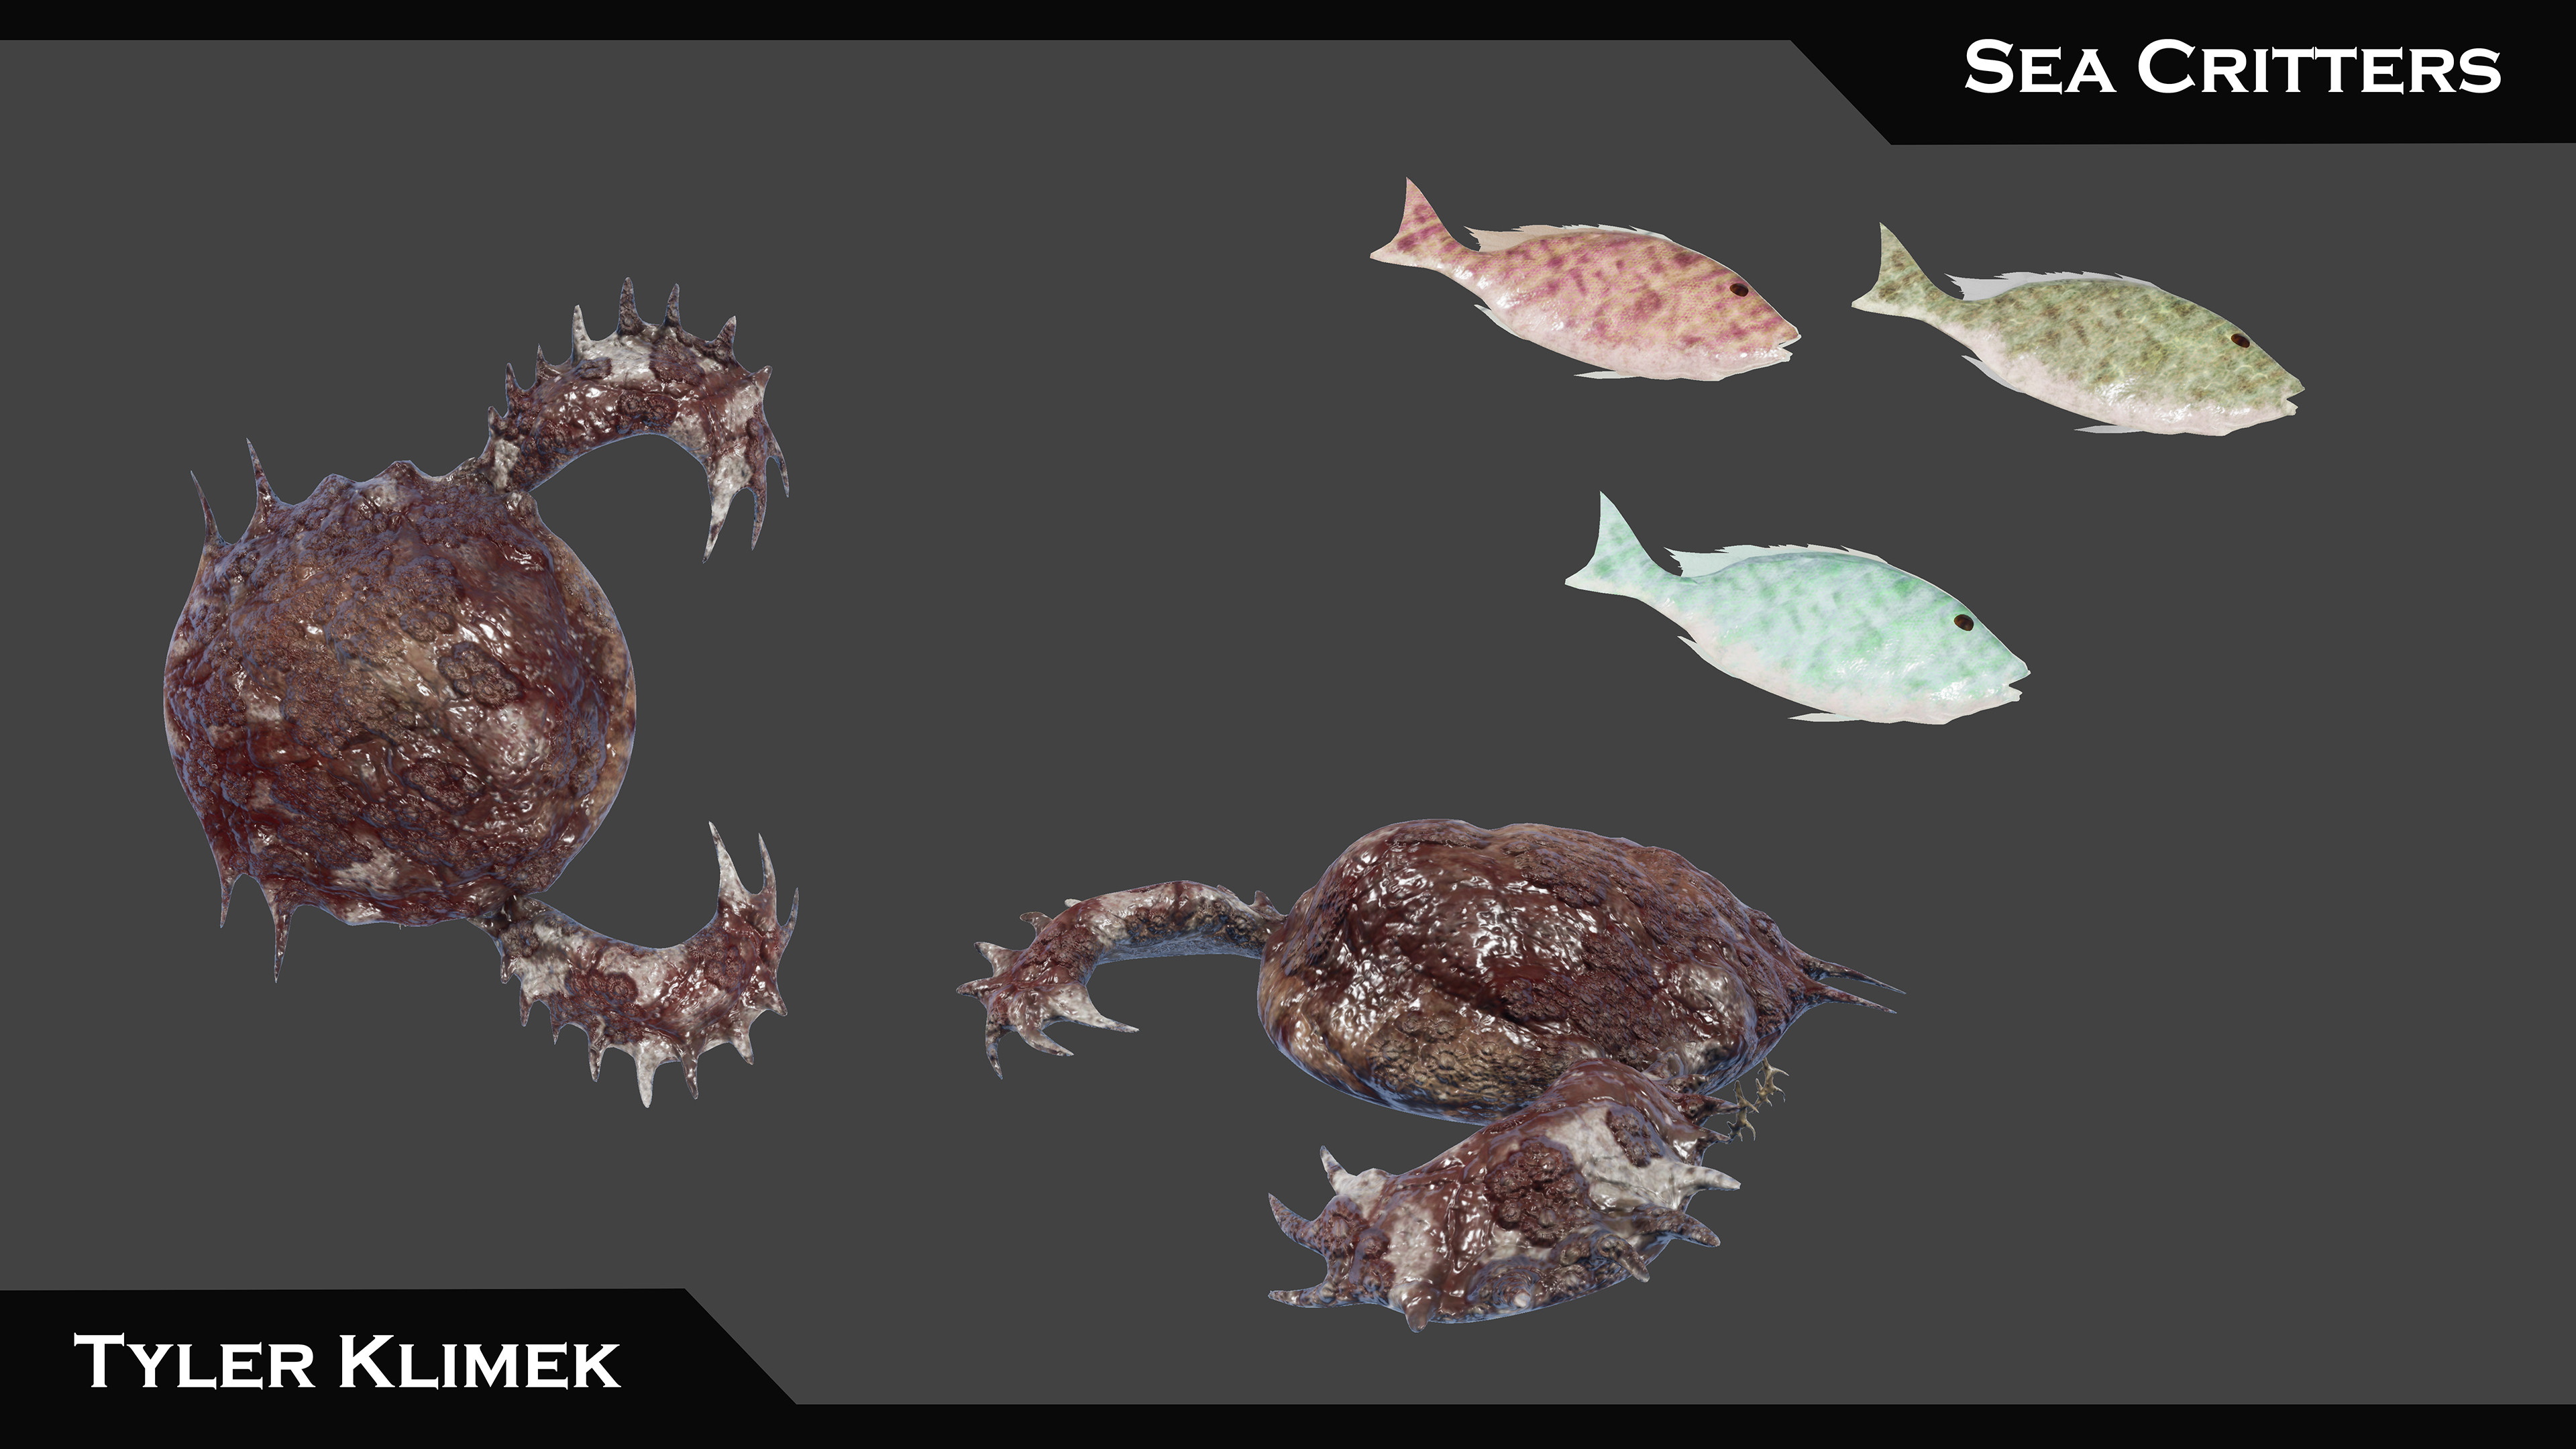 Some sea critters that were made for scattering around the broken displays